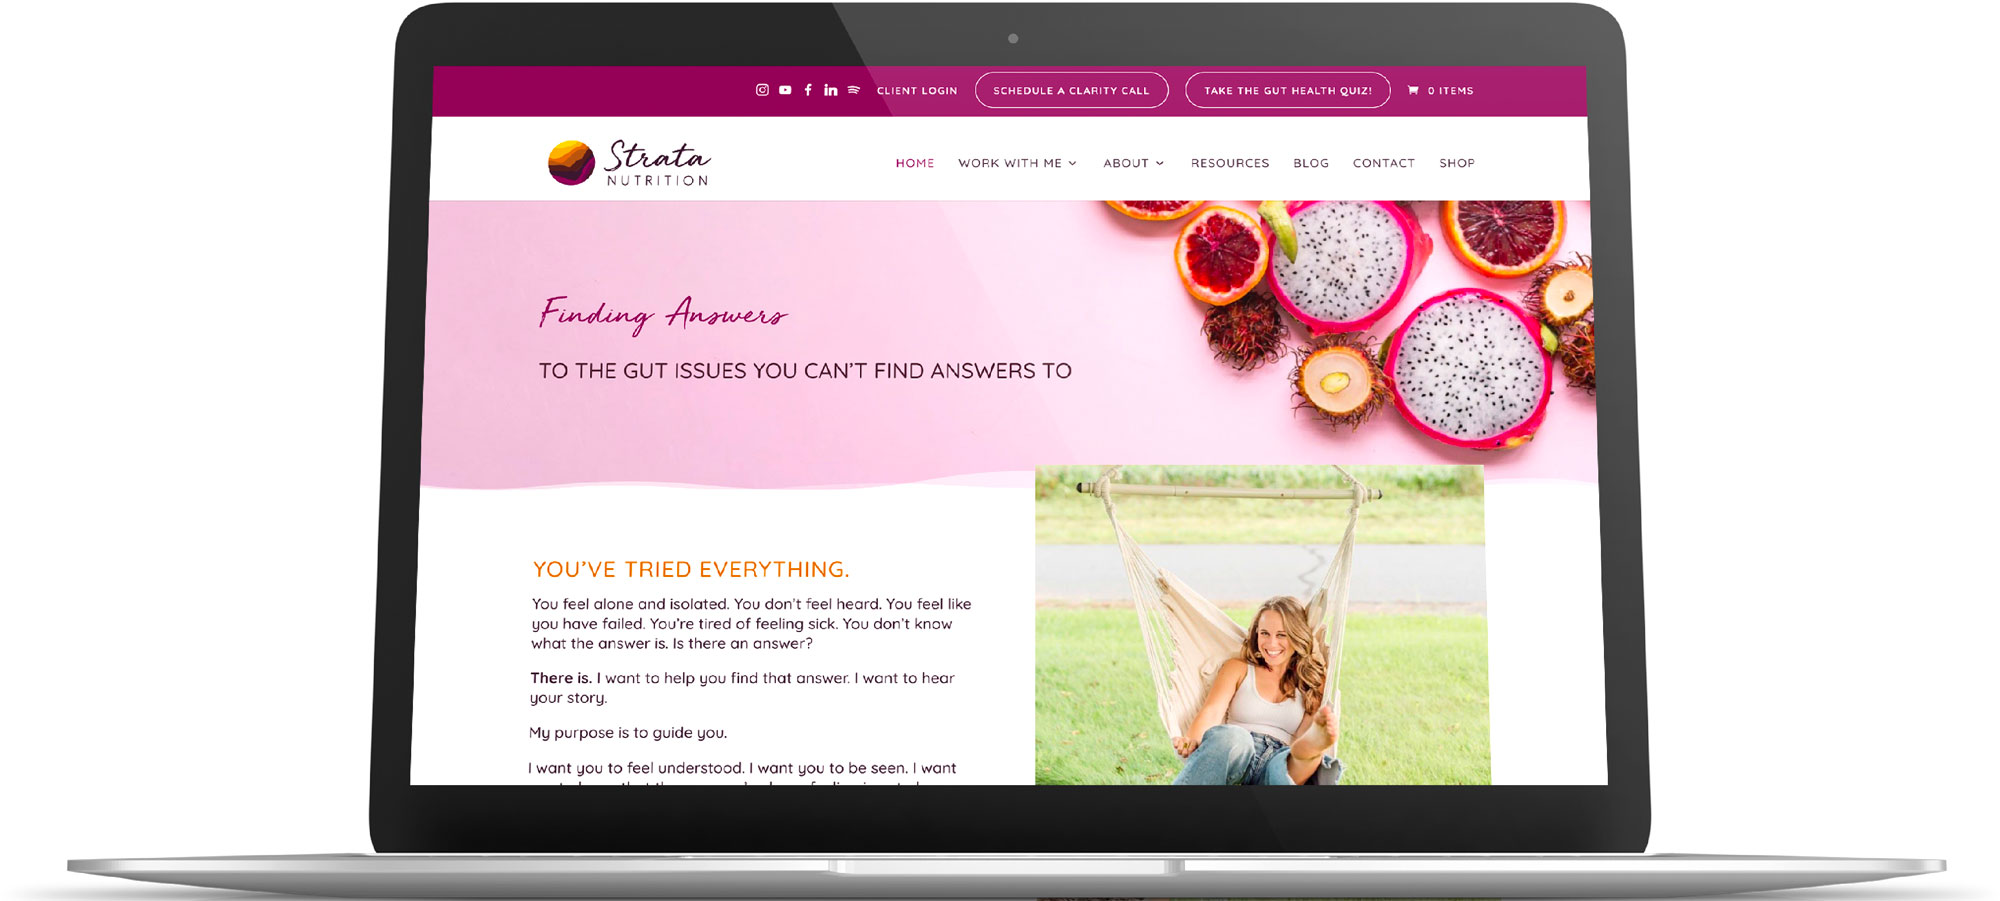 A screenshot of the Strata Nutrition home page shown on a macbook laptop screen, nutritionist website